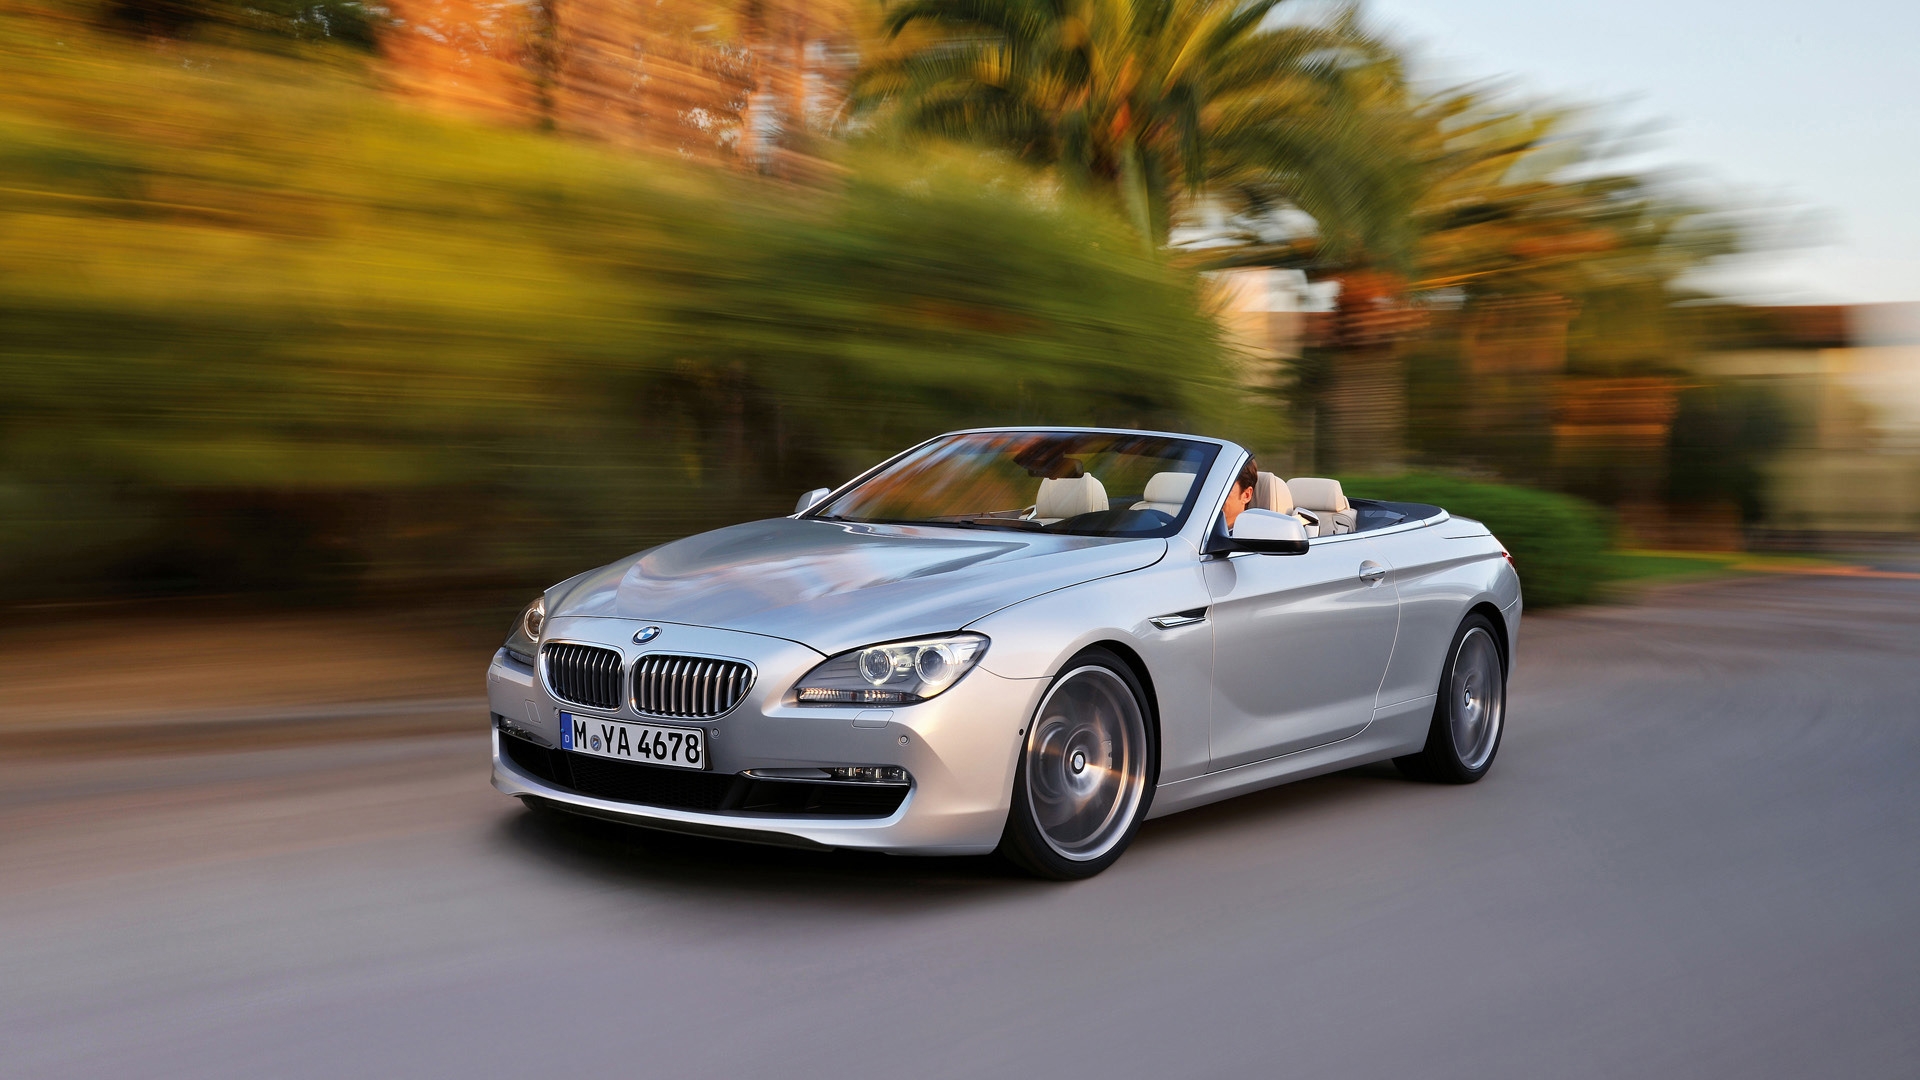 2011 BMW 6 Series Convertible Topless for 1920 x 1080 HDTV 1080p resolution